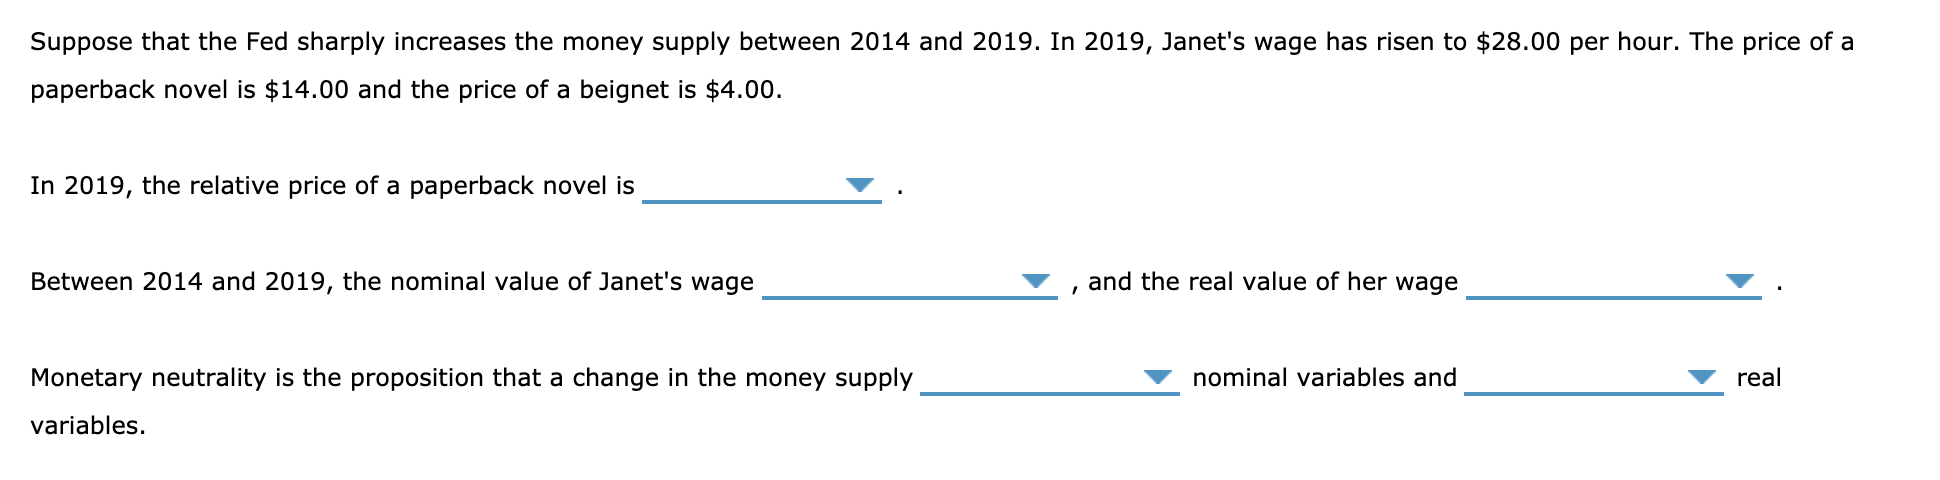 Suppose that the Fed sharply increases the money supply between 2014 and 2019. In 2019, Janet's wage has risen to $28.00 per hour. The price of a
paperback novel is $14.00 and the price of a beignet is $4.00.
In 2019, the relative price of a paperback novel is
Between 2014 and 2019, the nominal value of Janet's wage
and the real value of her wage
Monetary neutrality is the proposition that a change in the money supply
nominal variables and
real
variables.
